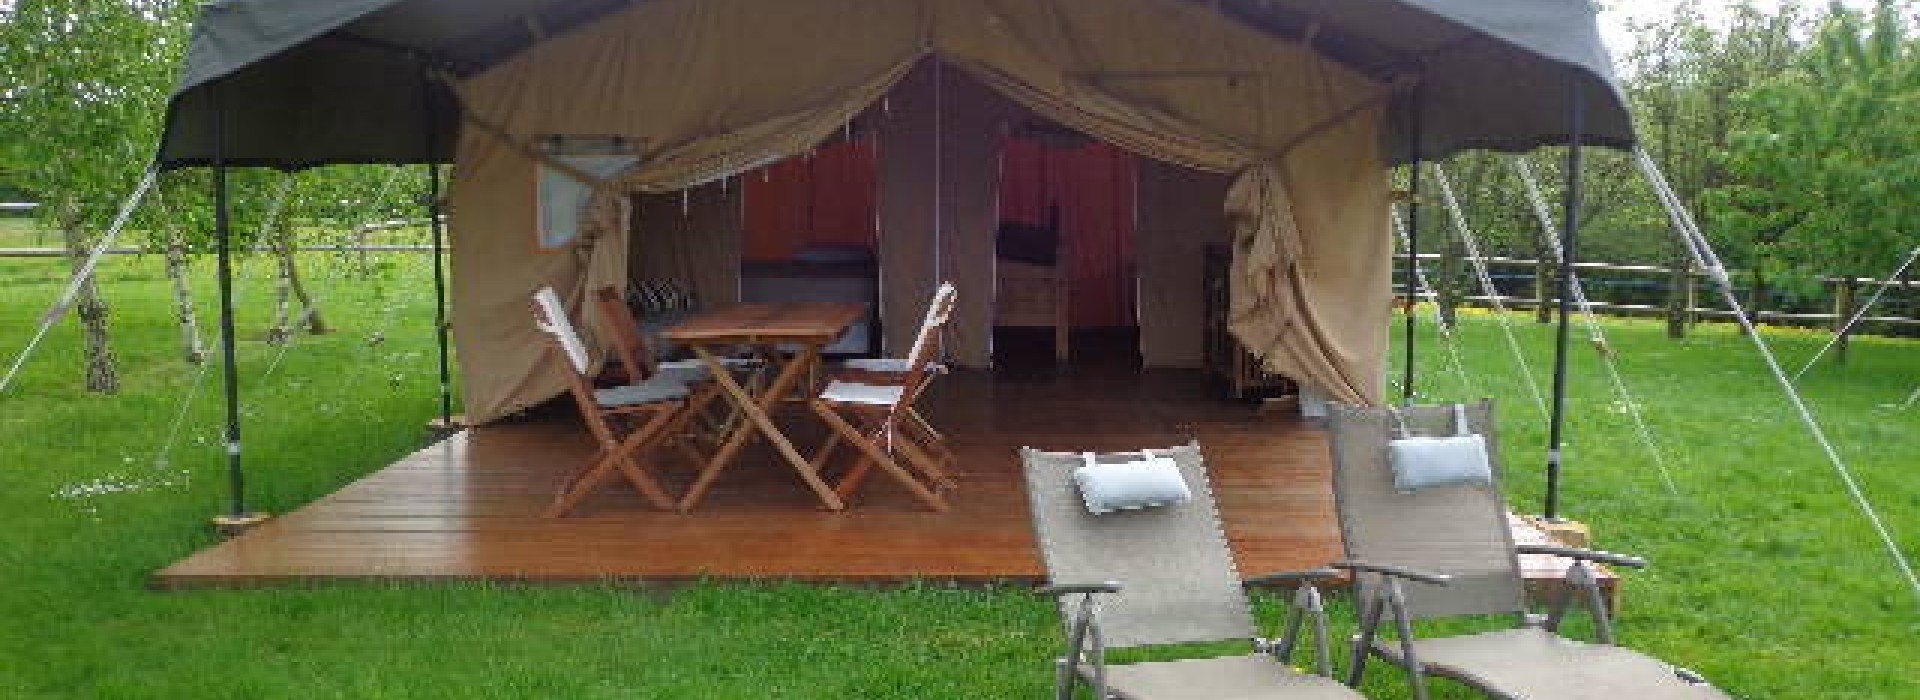 GLAMPING LE MANS HOLIDAYS